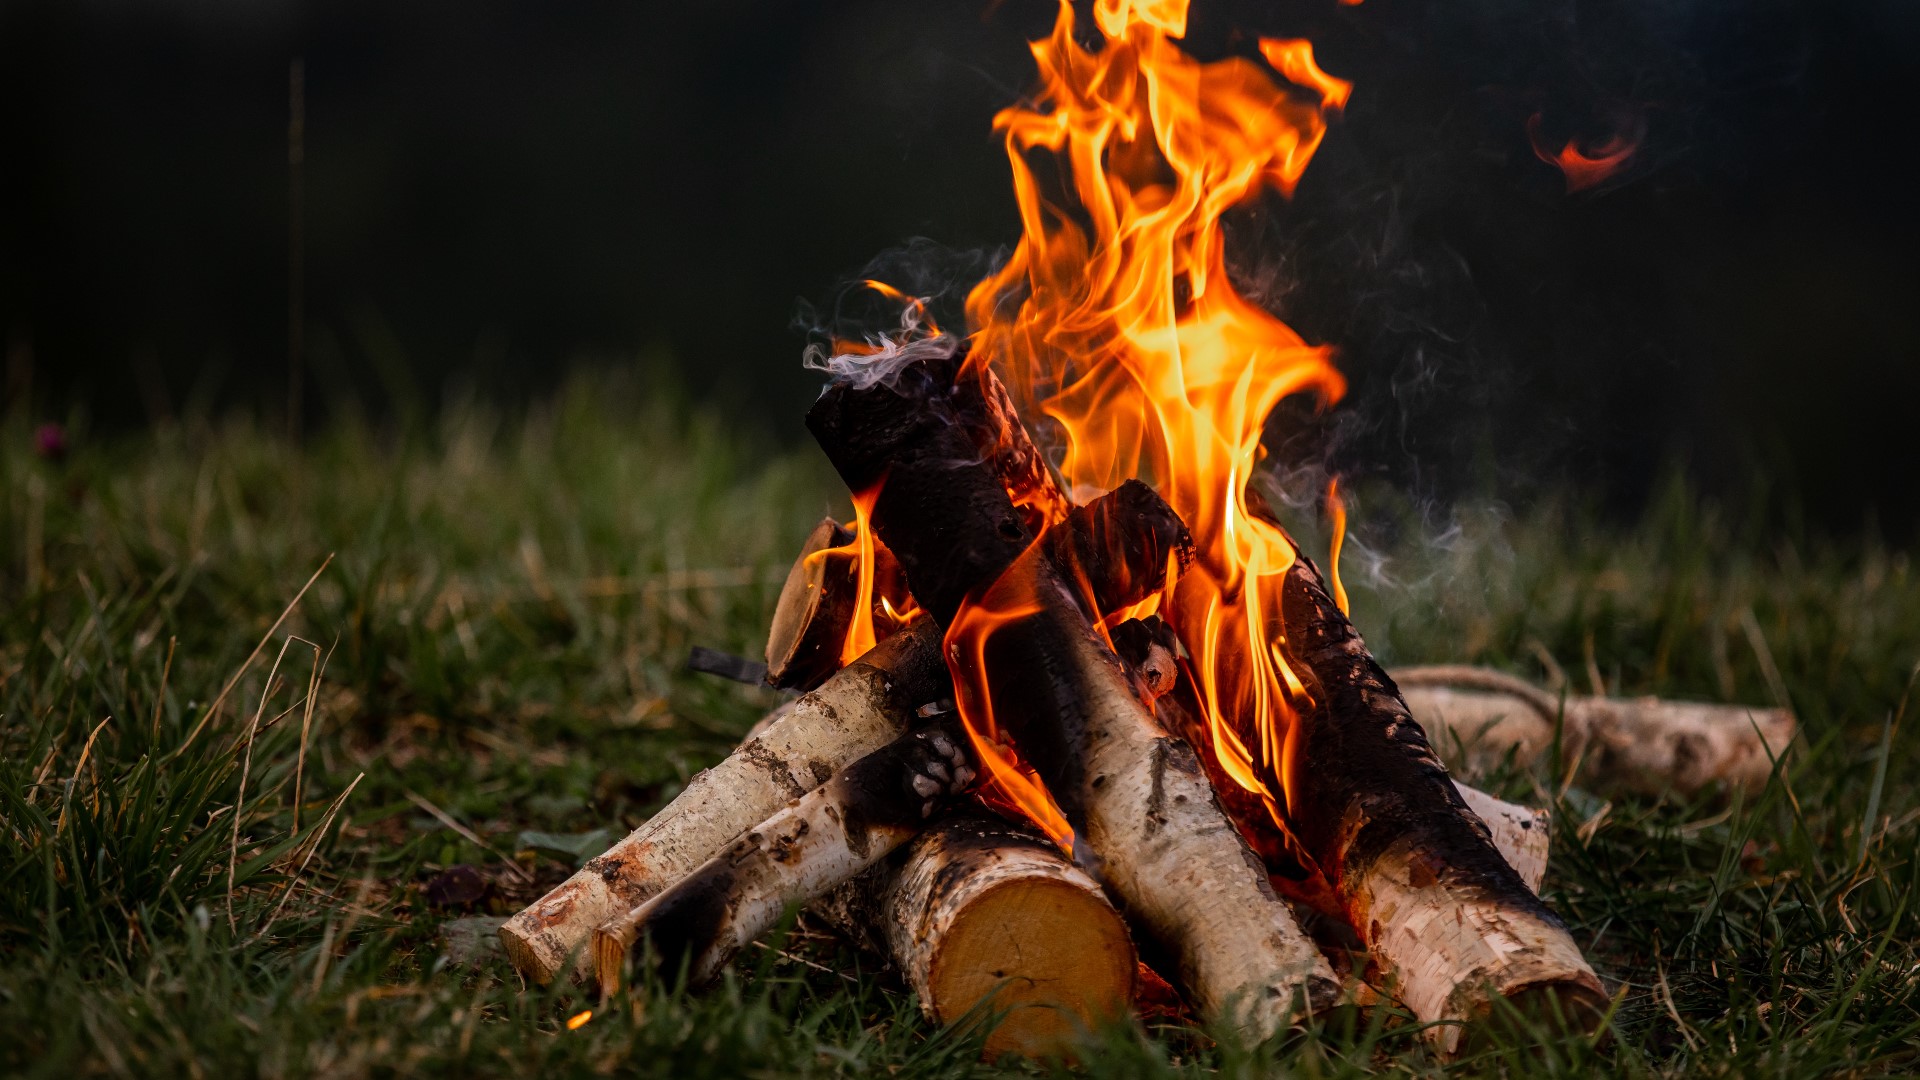 With fall officially here, many people are enjoying the cooler nights outside by cozying up next to a bonfire. Here are some tips to remember.